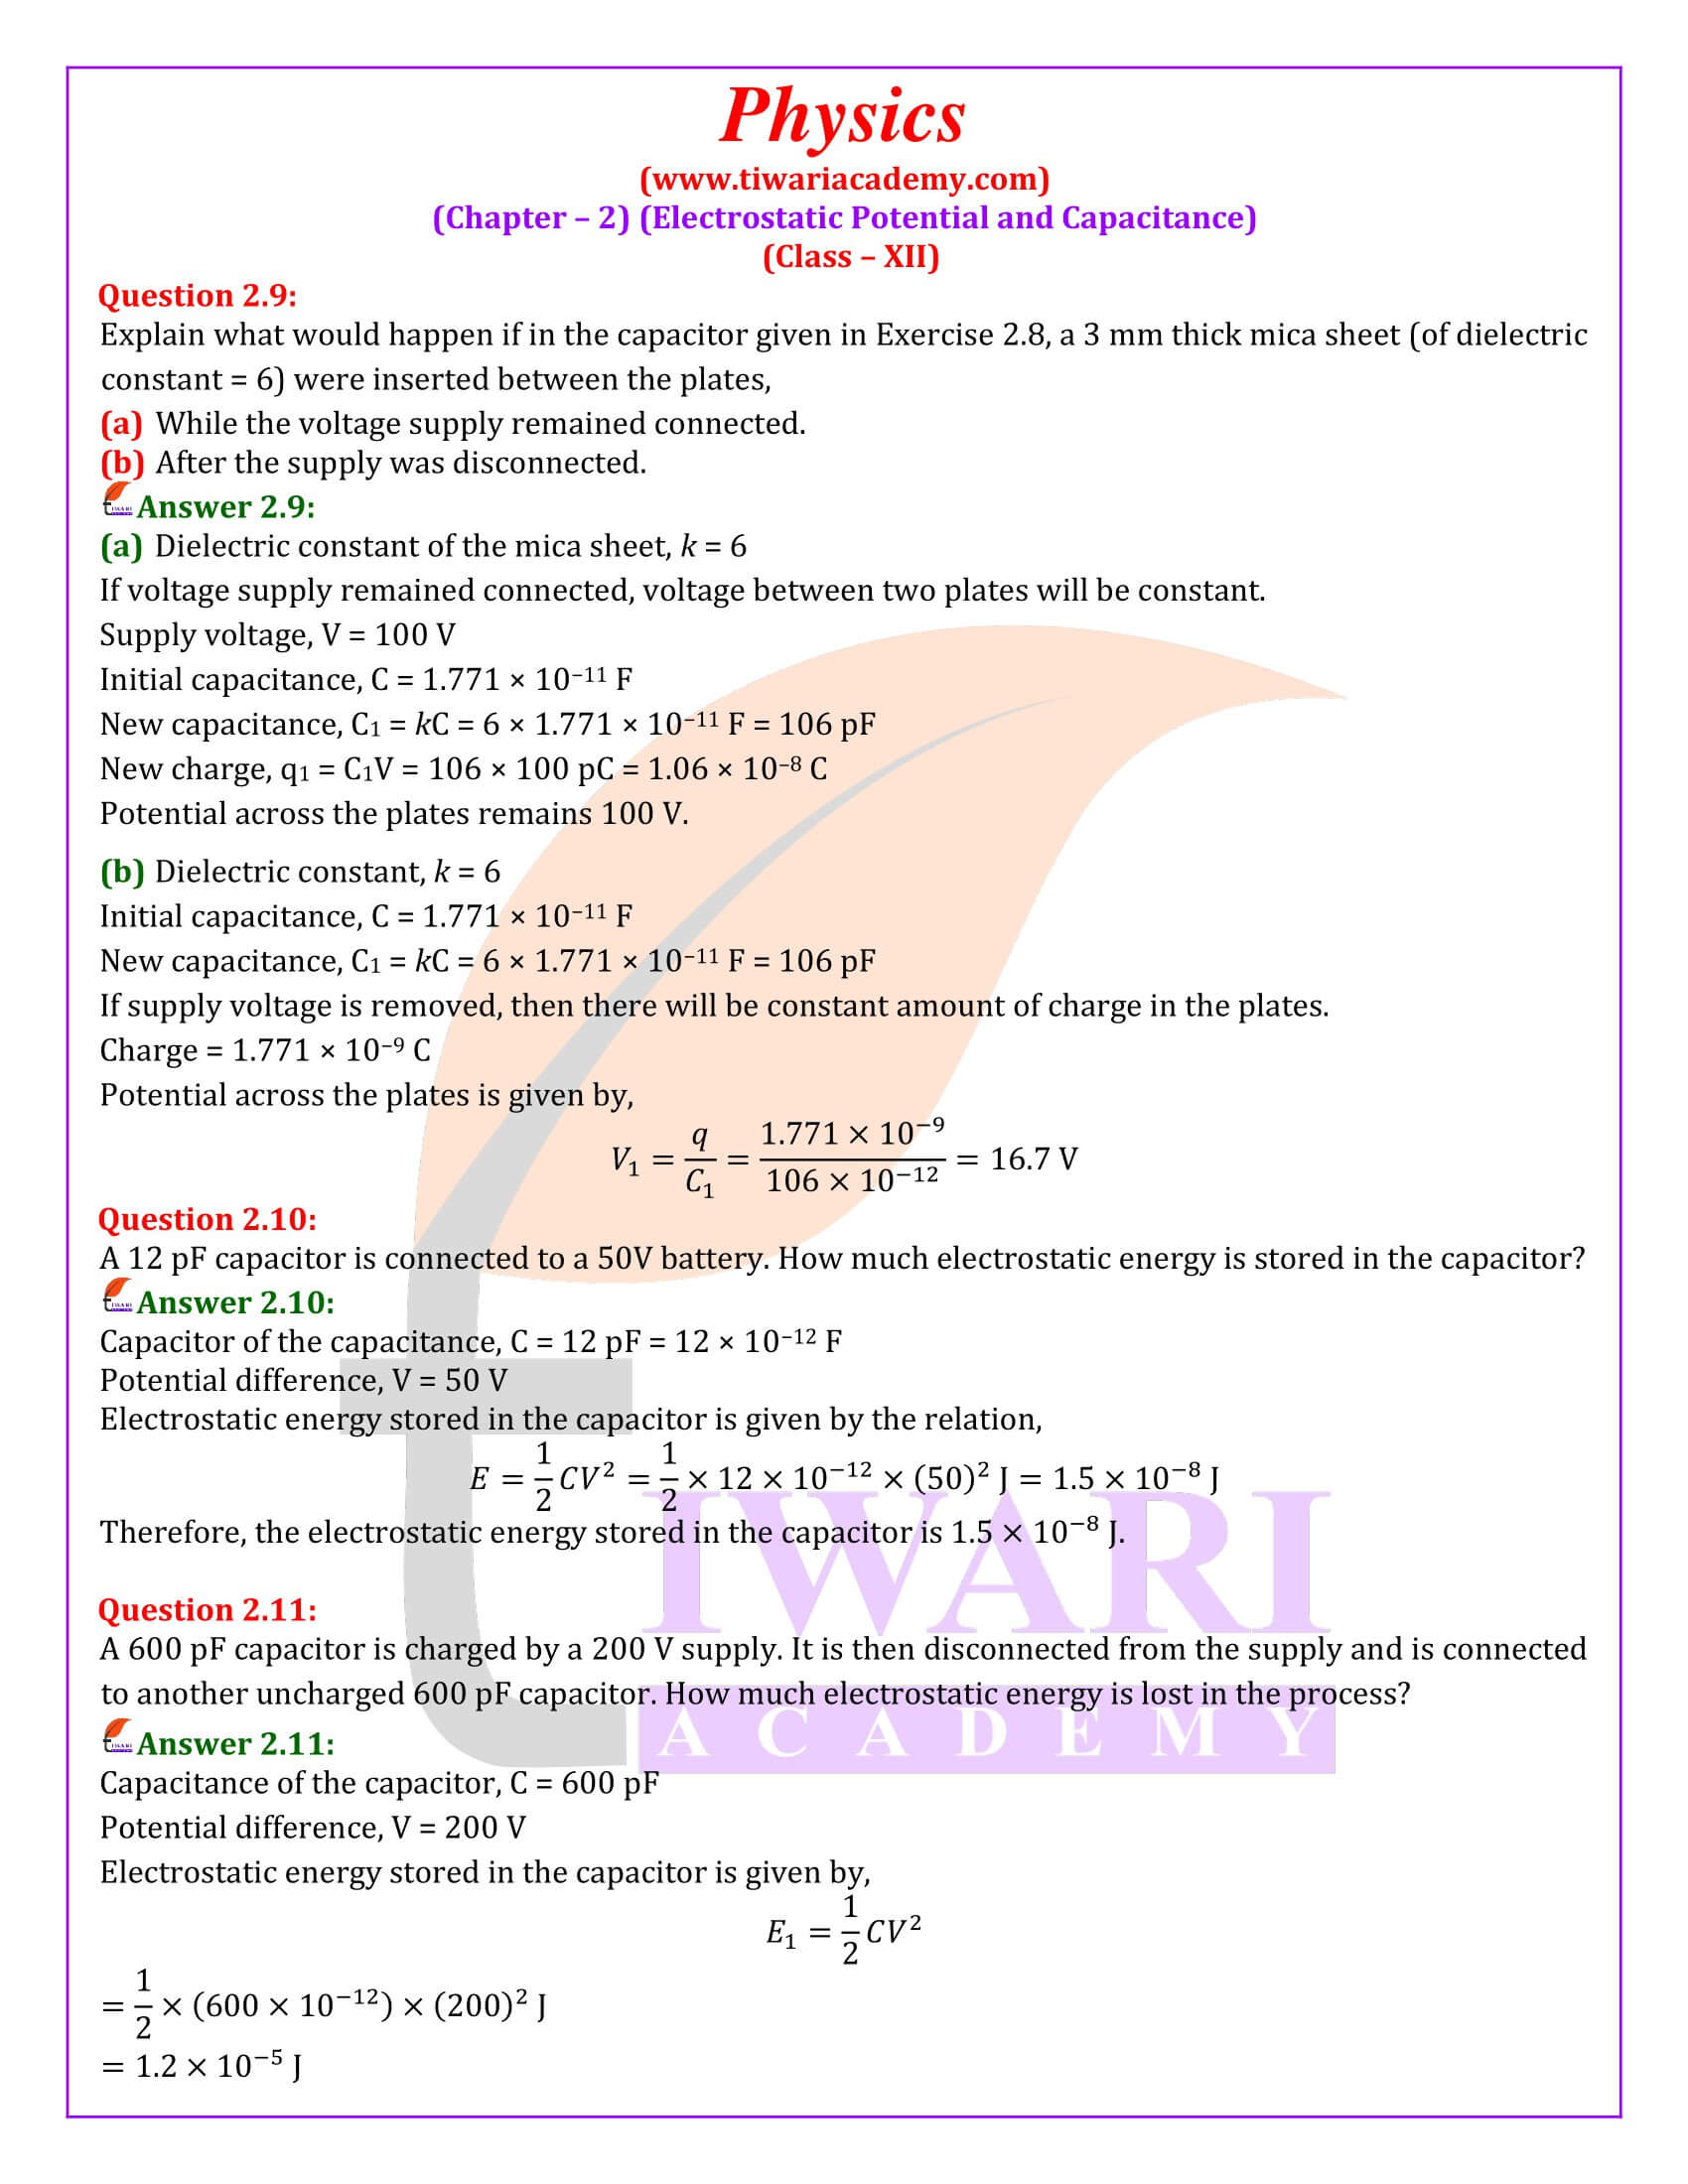 NCERT Solutions for Class 12 Physics Chapter 2 revised and modified